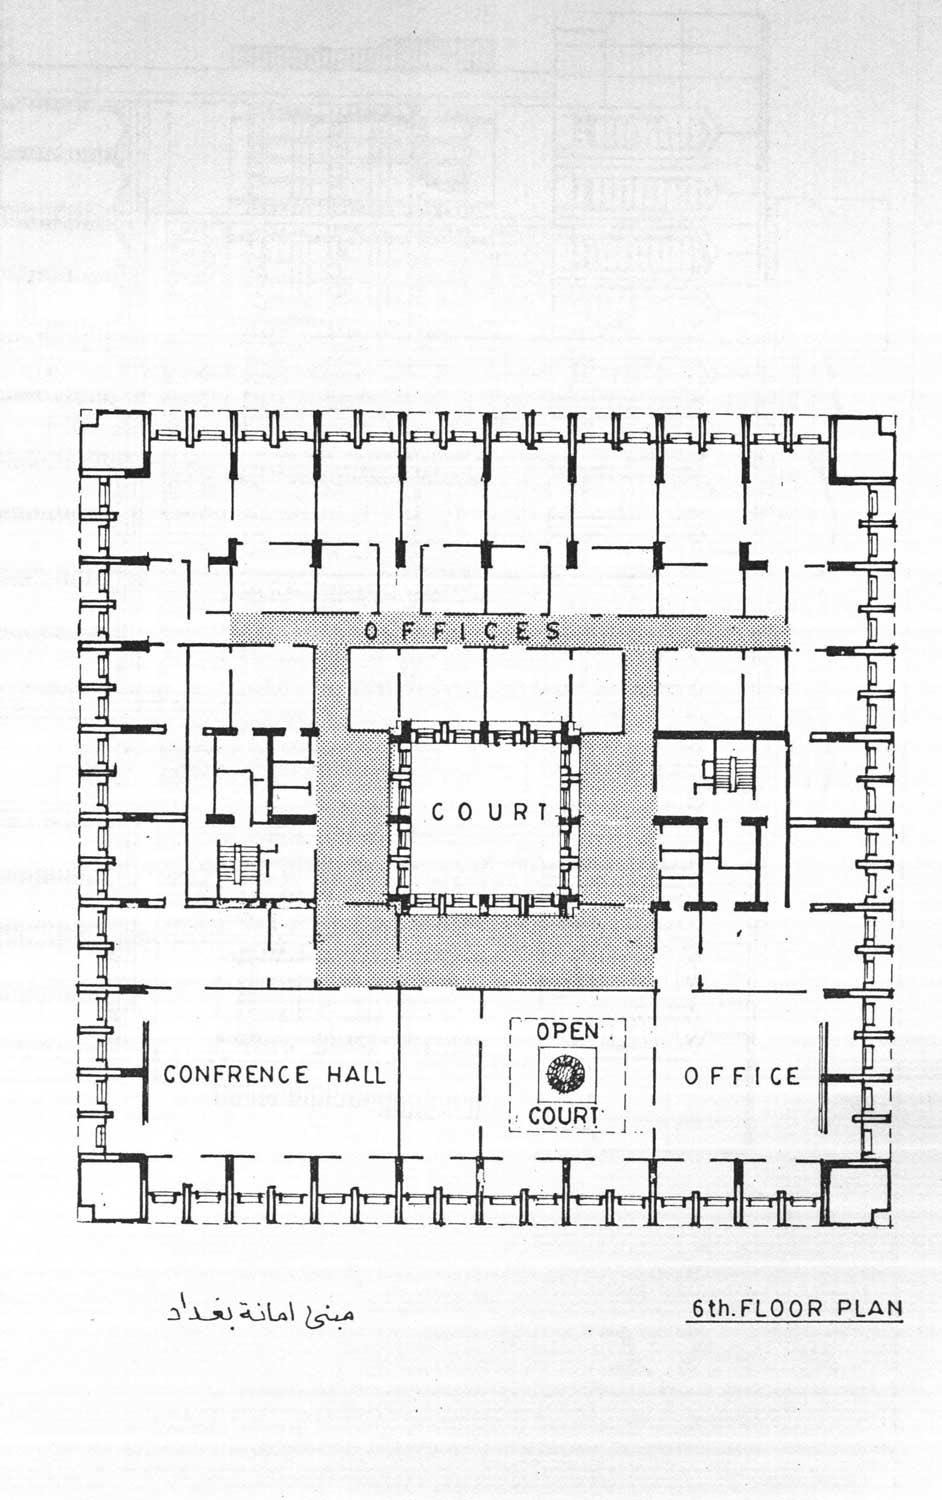 Plan for the 6th floor of the Mayor's Office Building.